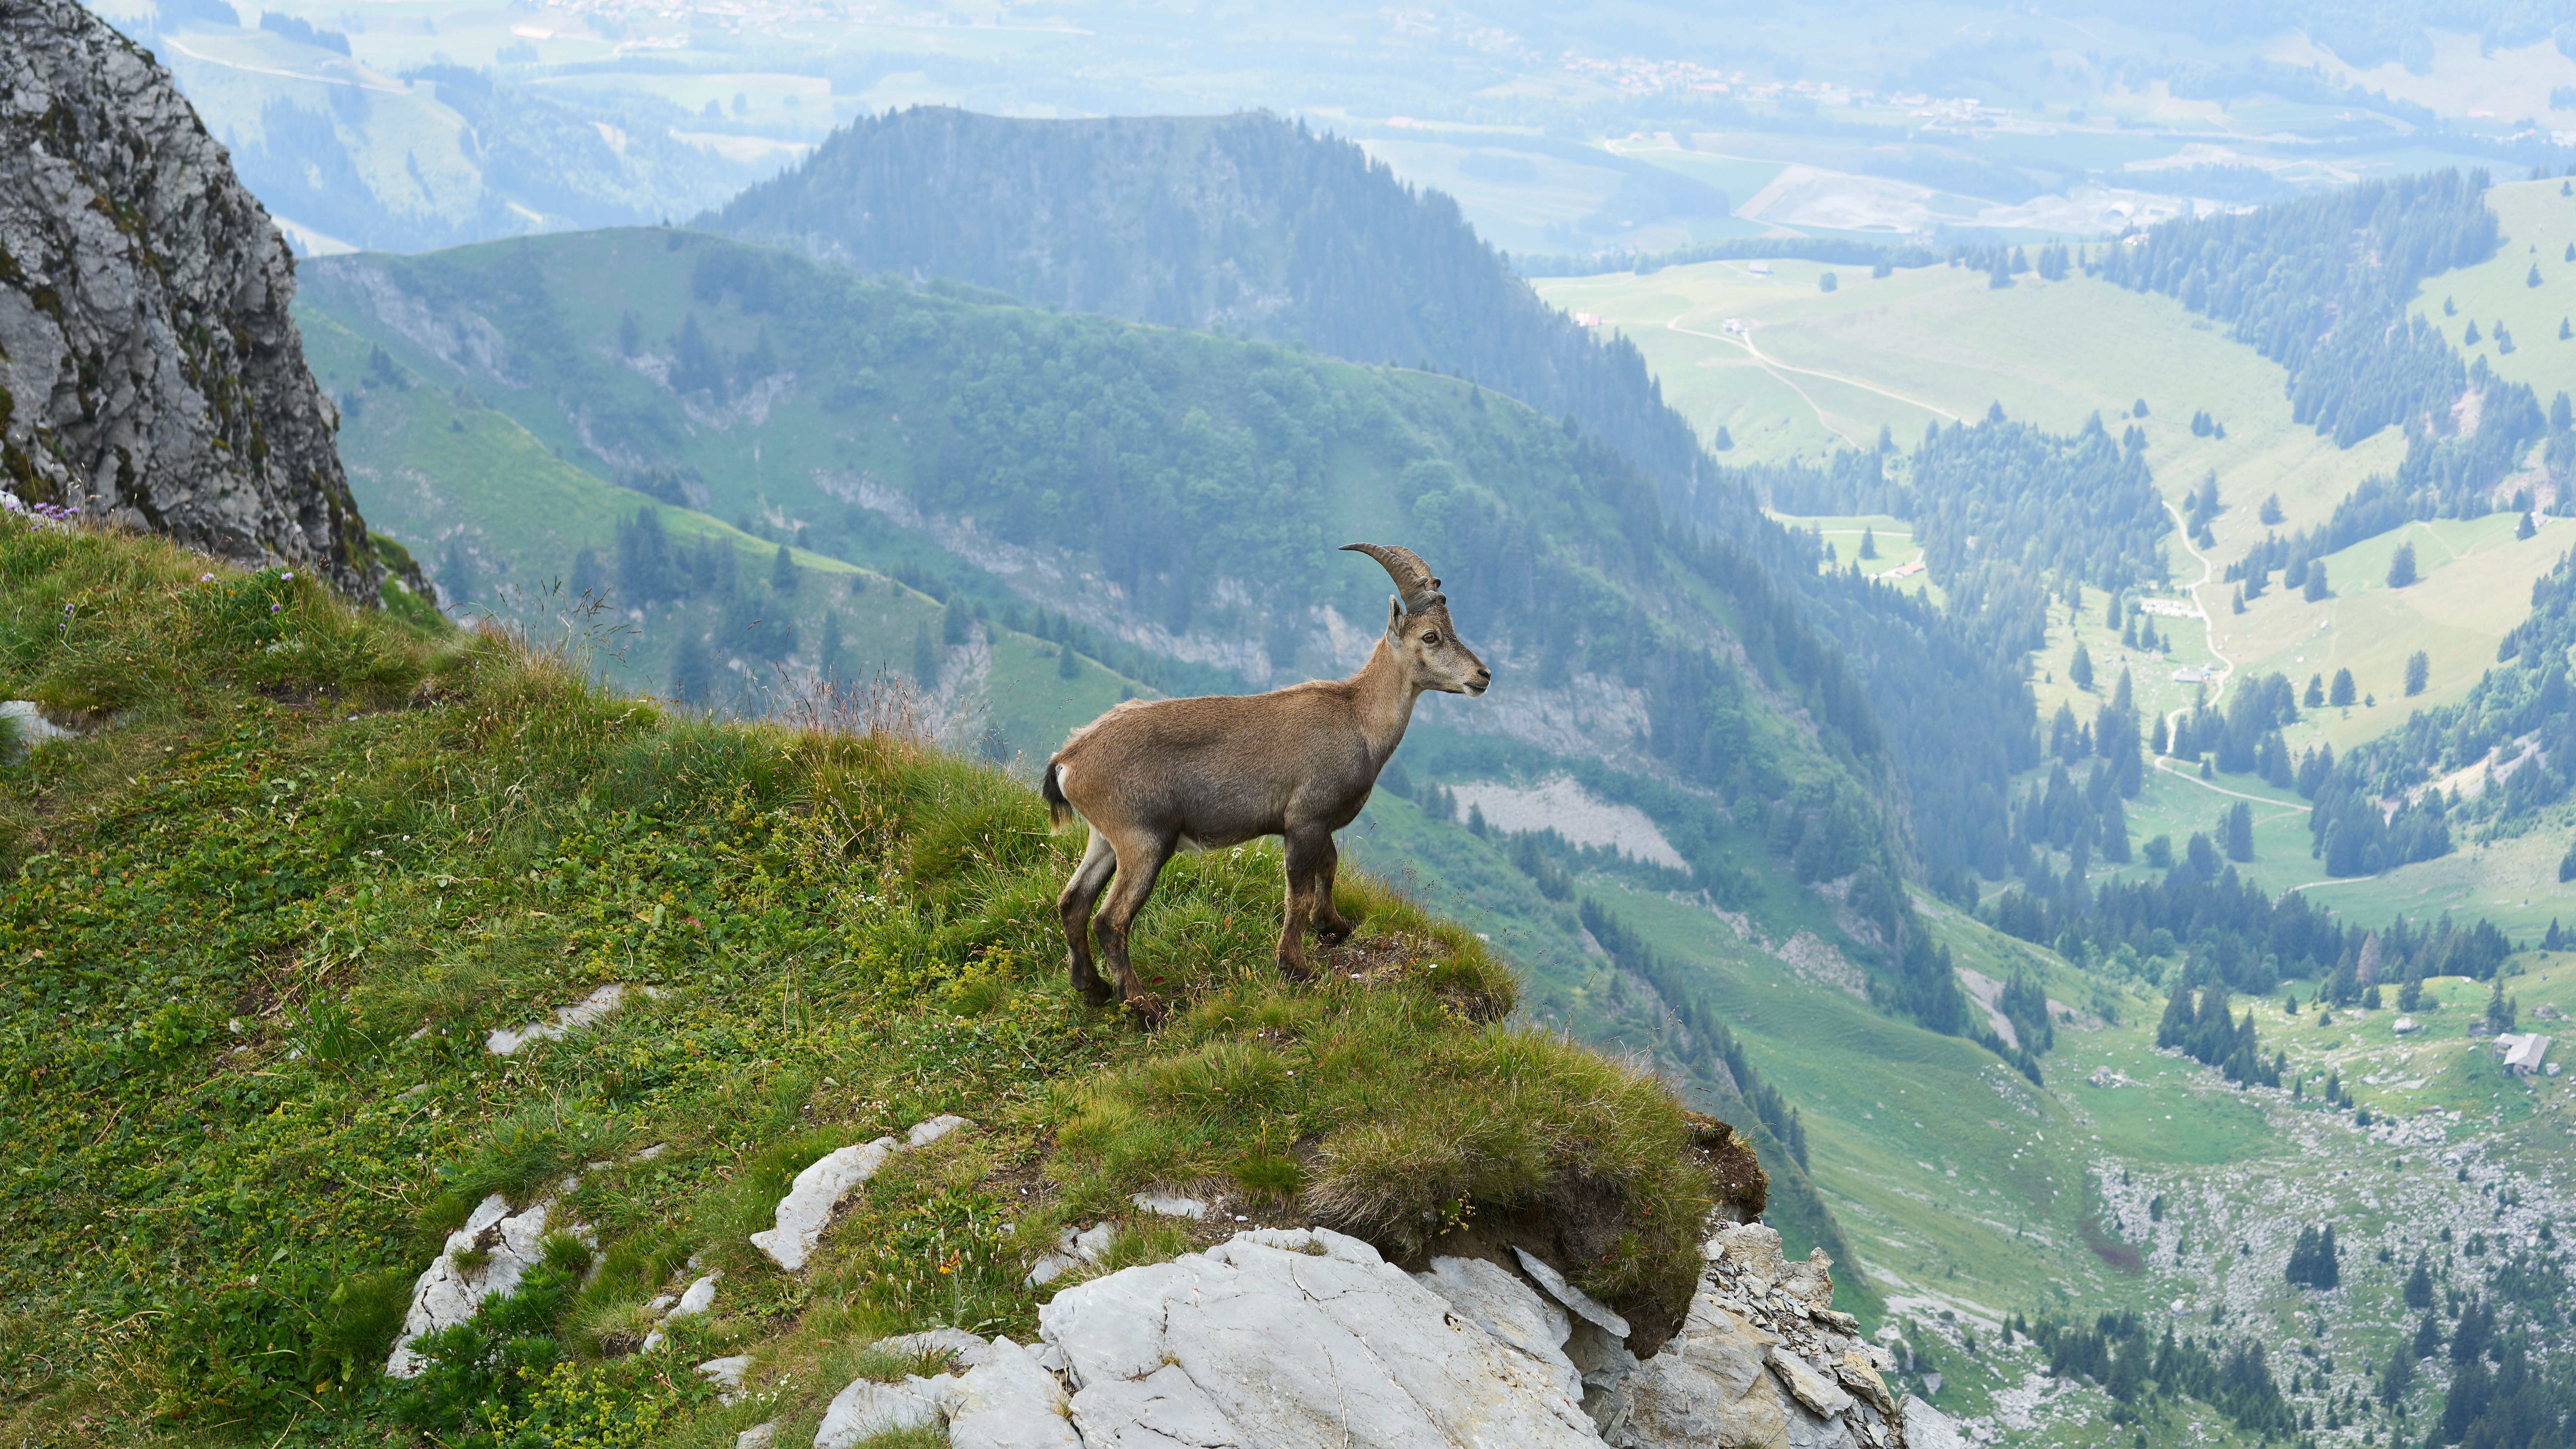 A young Ibex at the Vanil Noir, Switzerland.